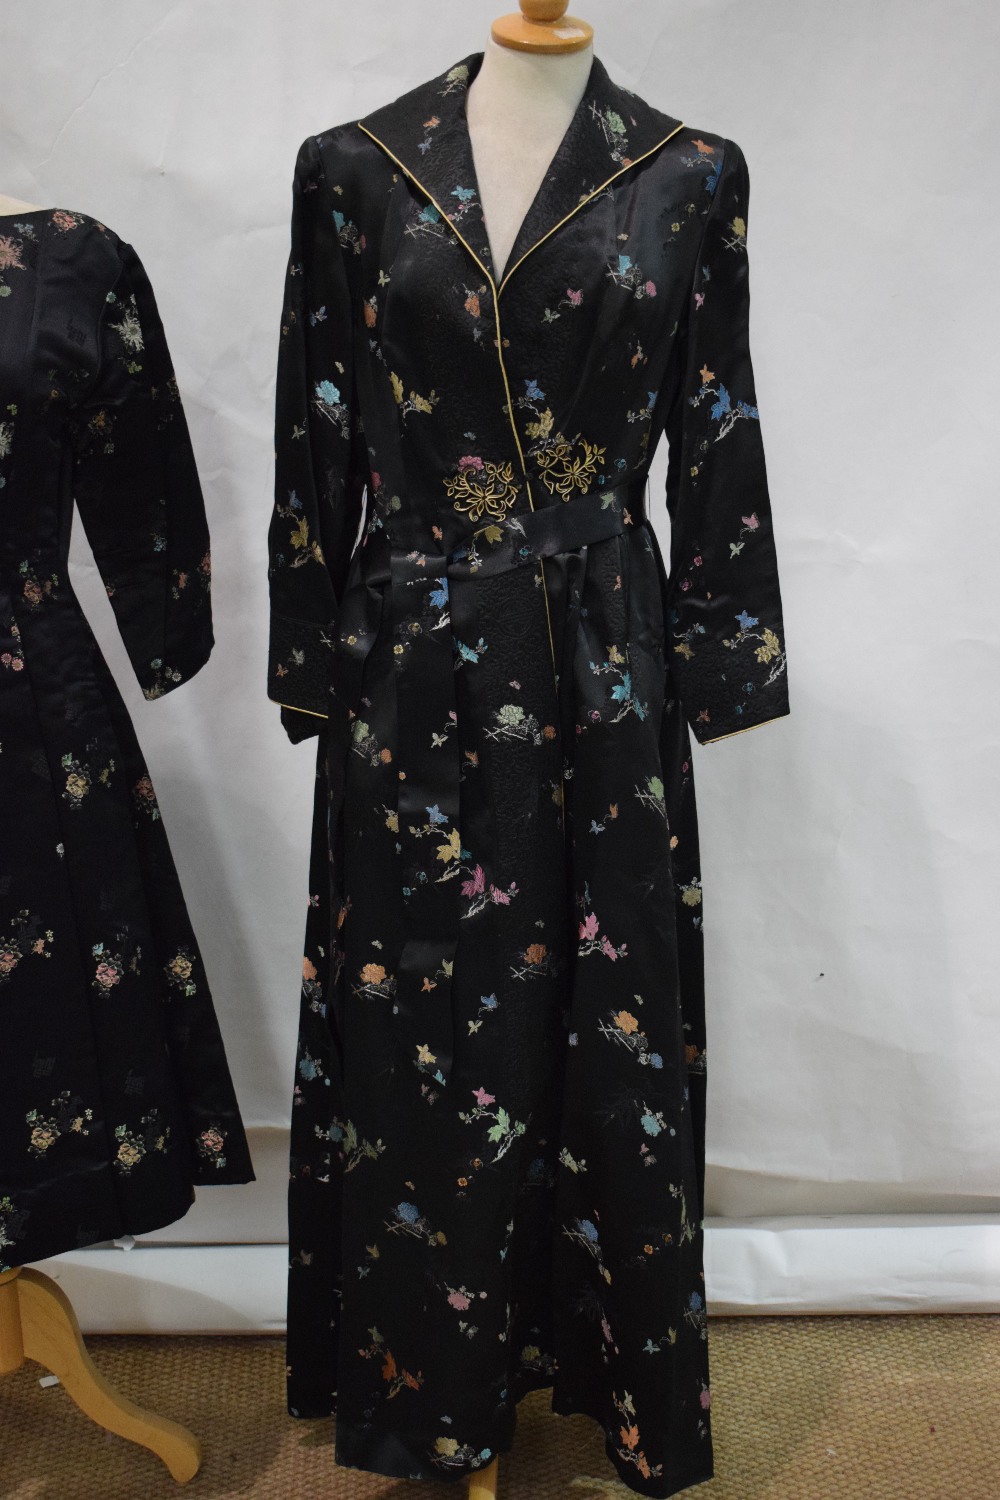 Chinese brocaded black satin evening coat and dress, mid-20th century, made for the Western - Image 5 of 7